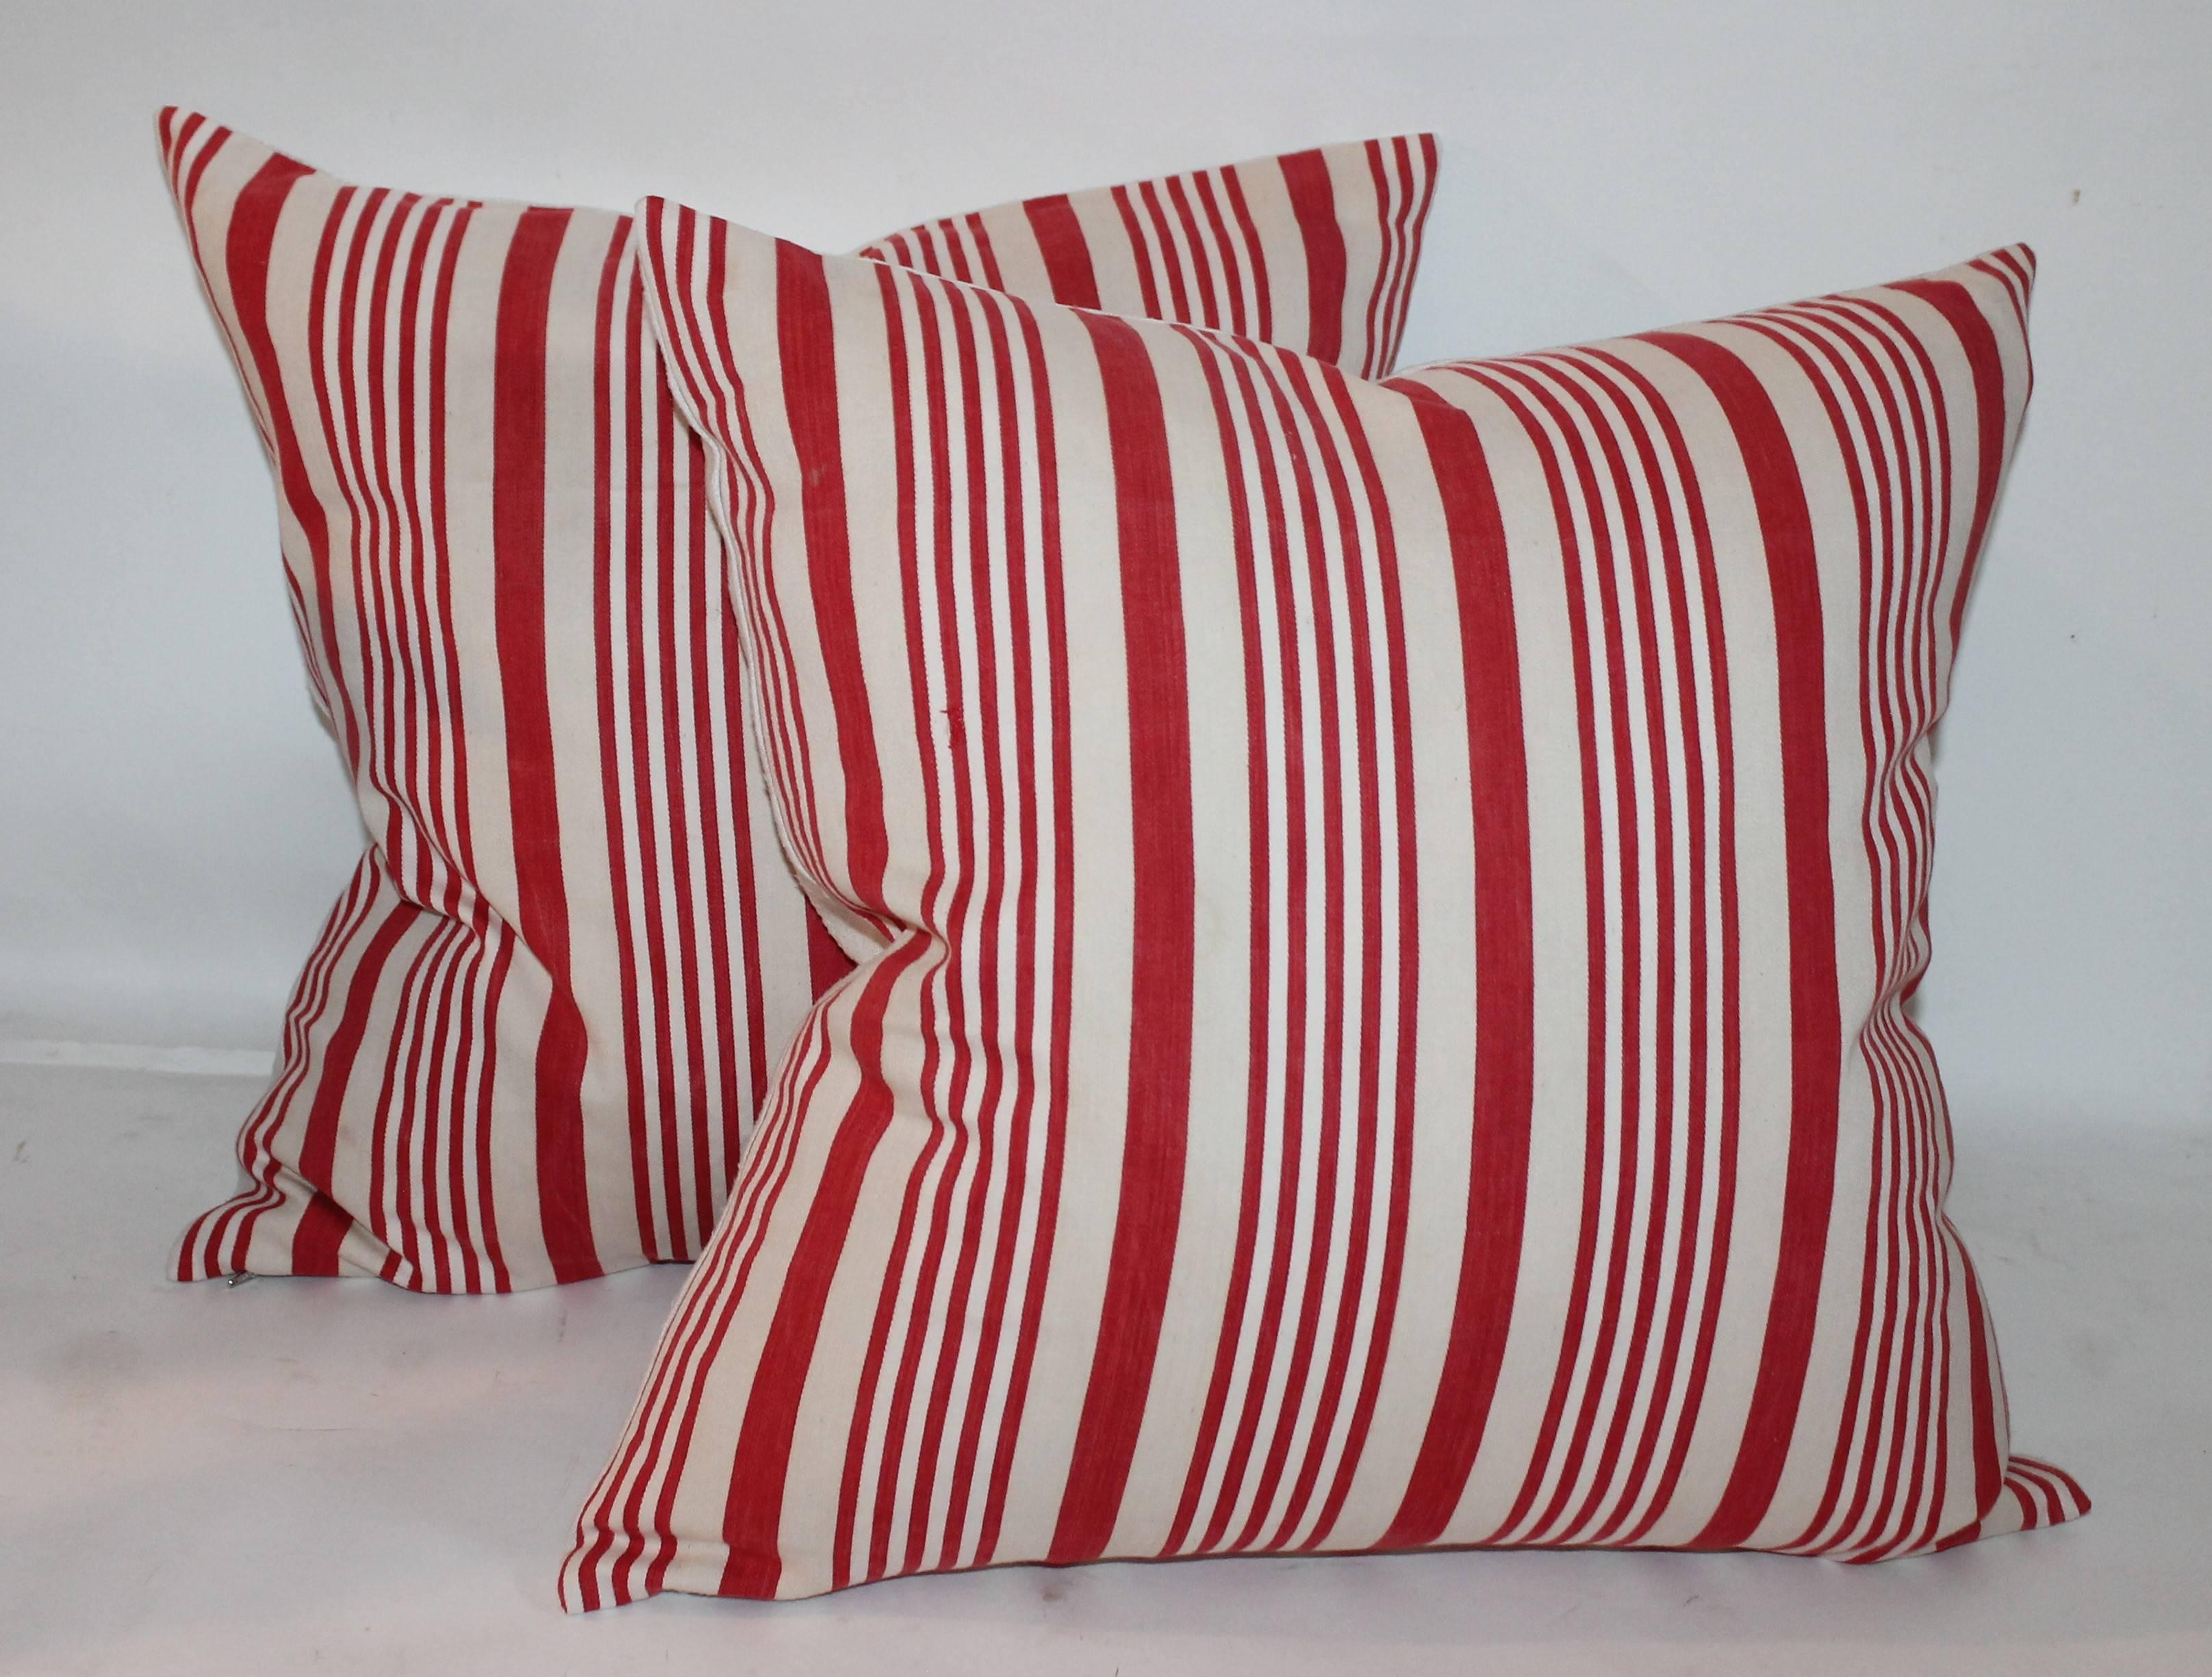 These amazing early red and white striped ticking pillows are in great condition and are sold in pairs. There are two pairs in stock a 20 x 20 and a pair 22 x 22. Sold individually.